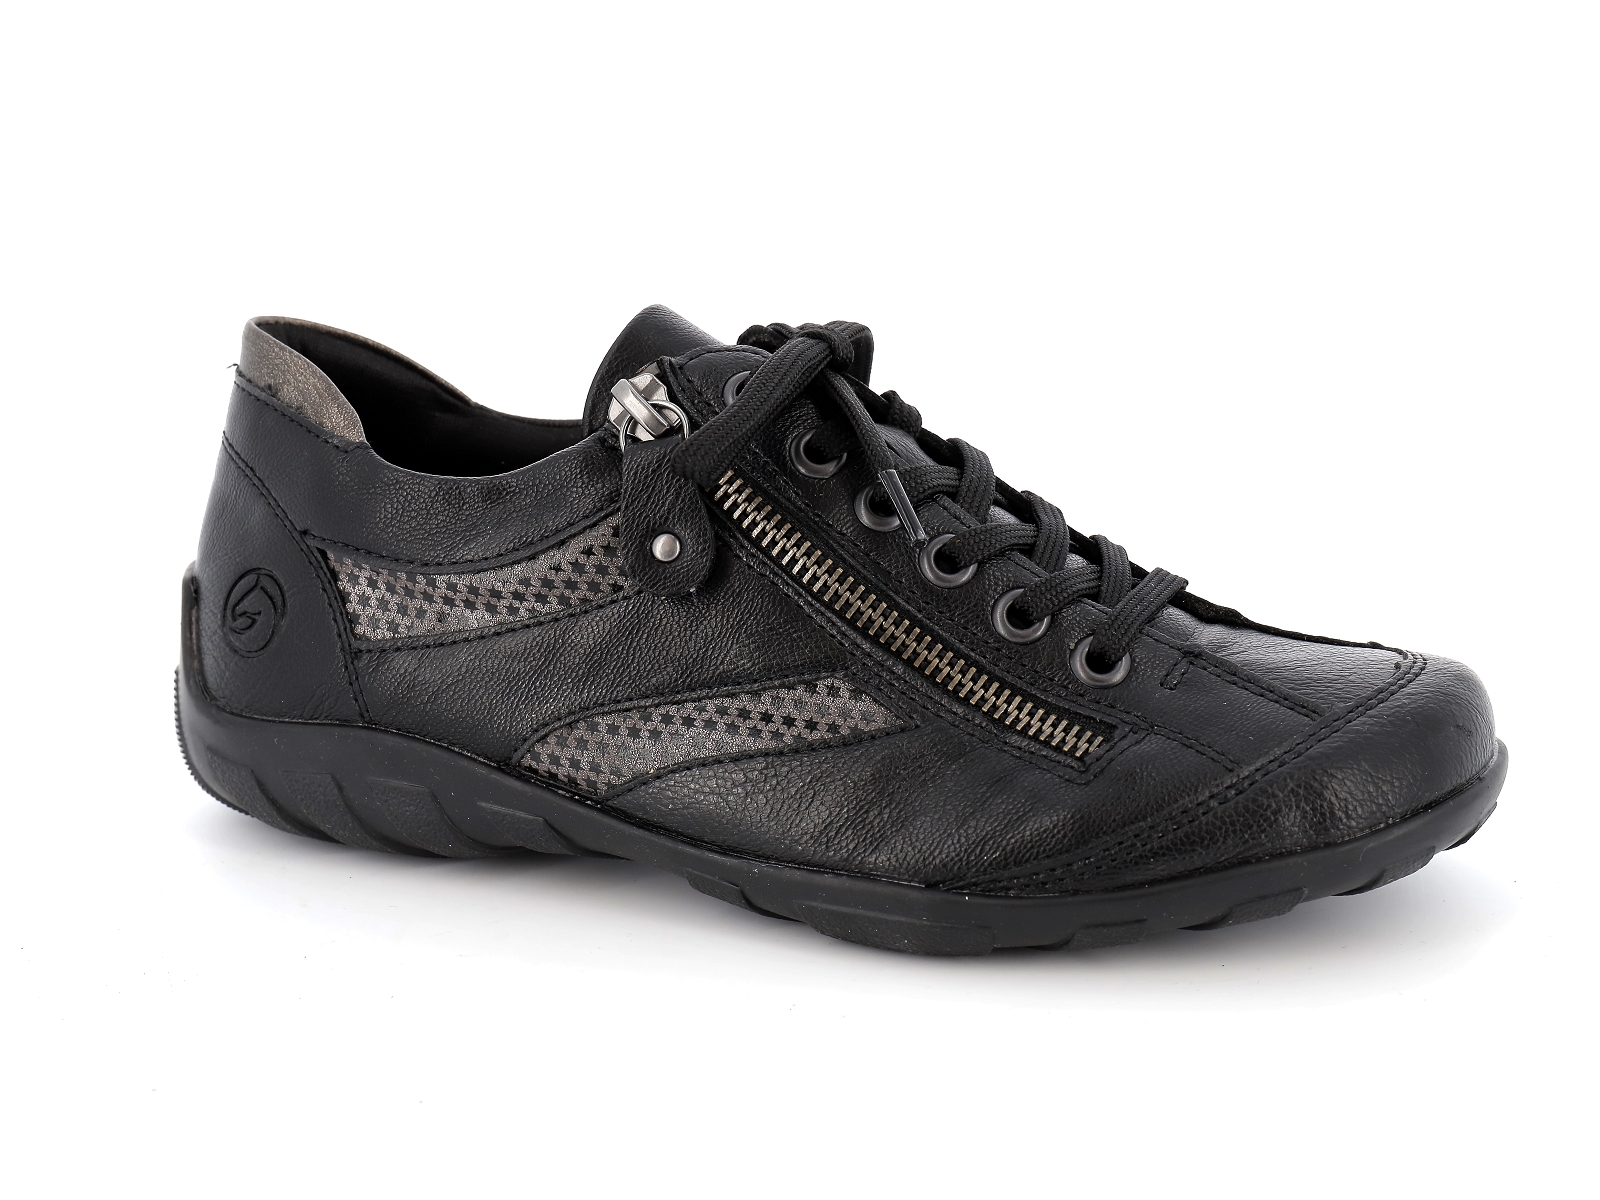 Sneakers Basses Femme Remonte R3402